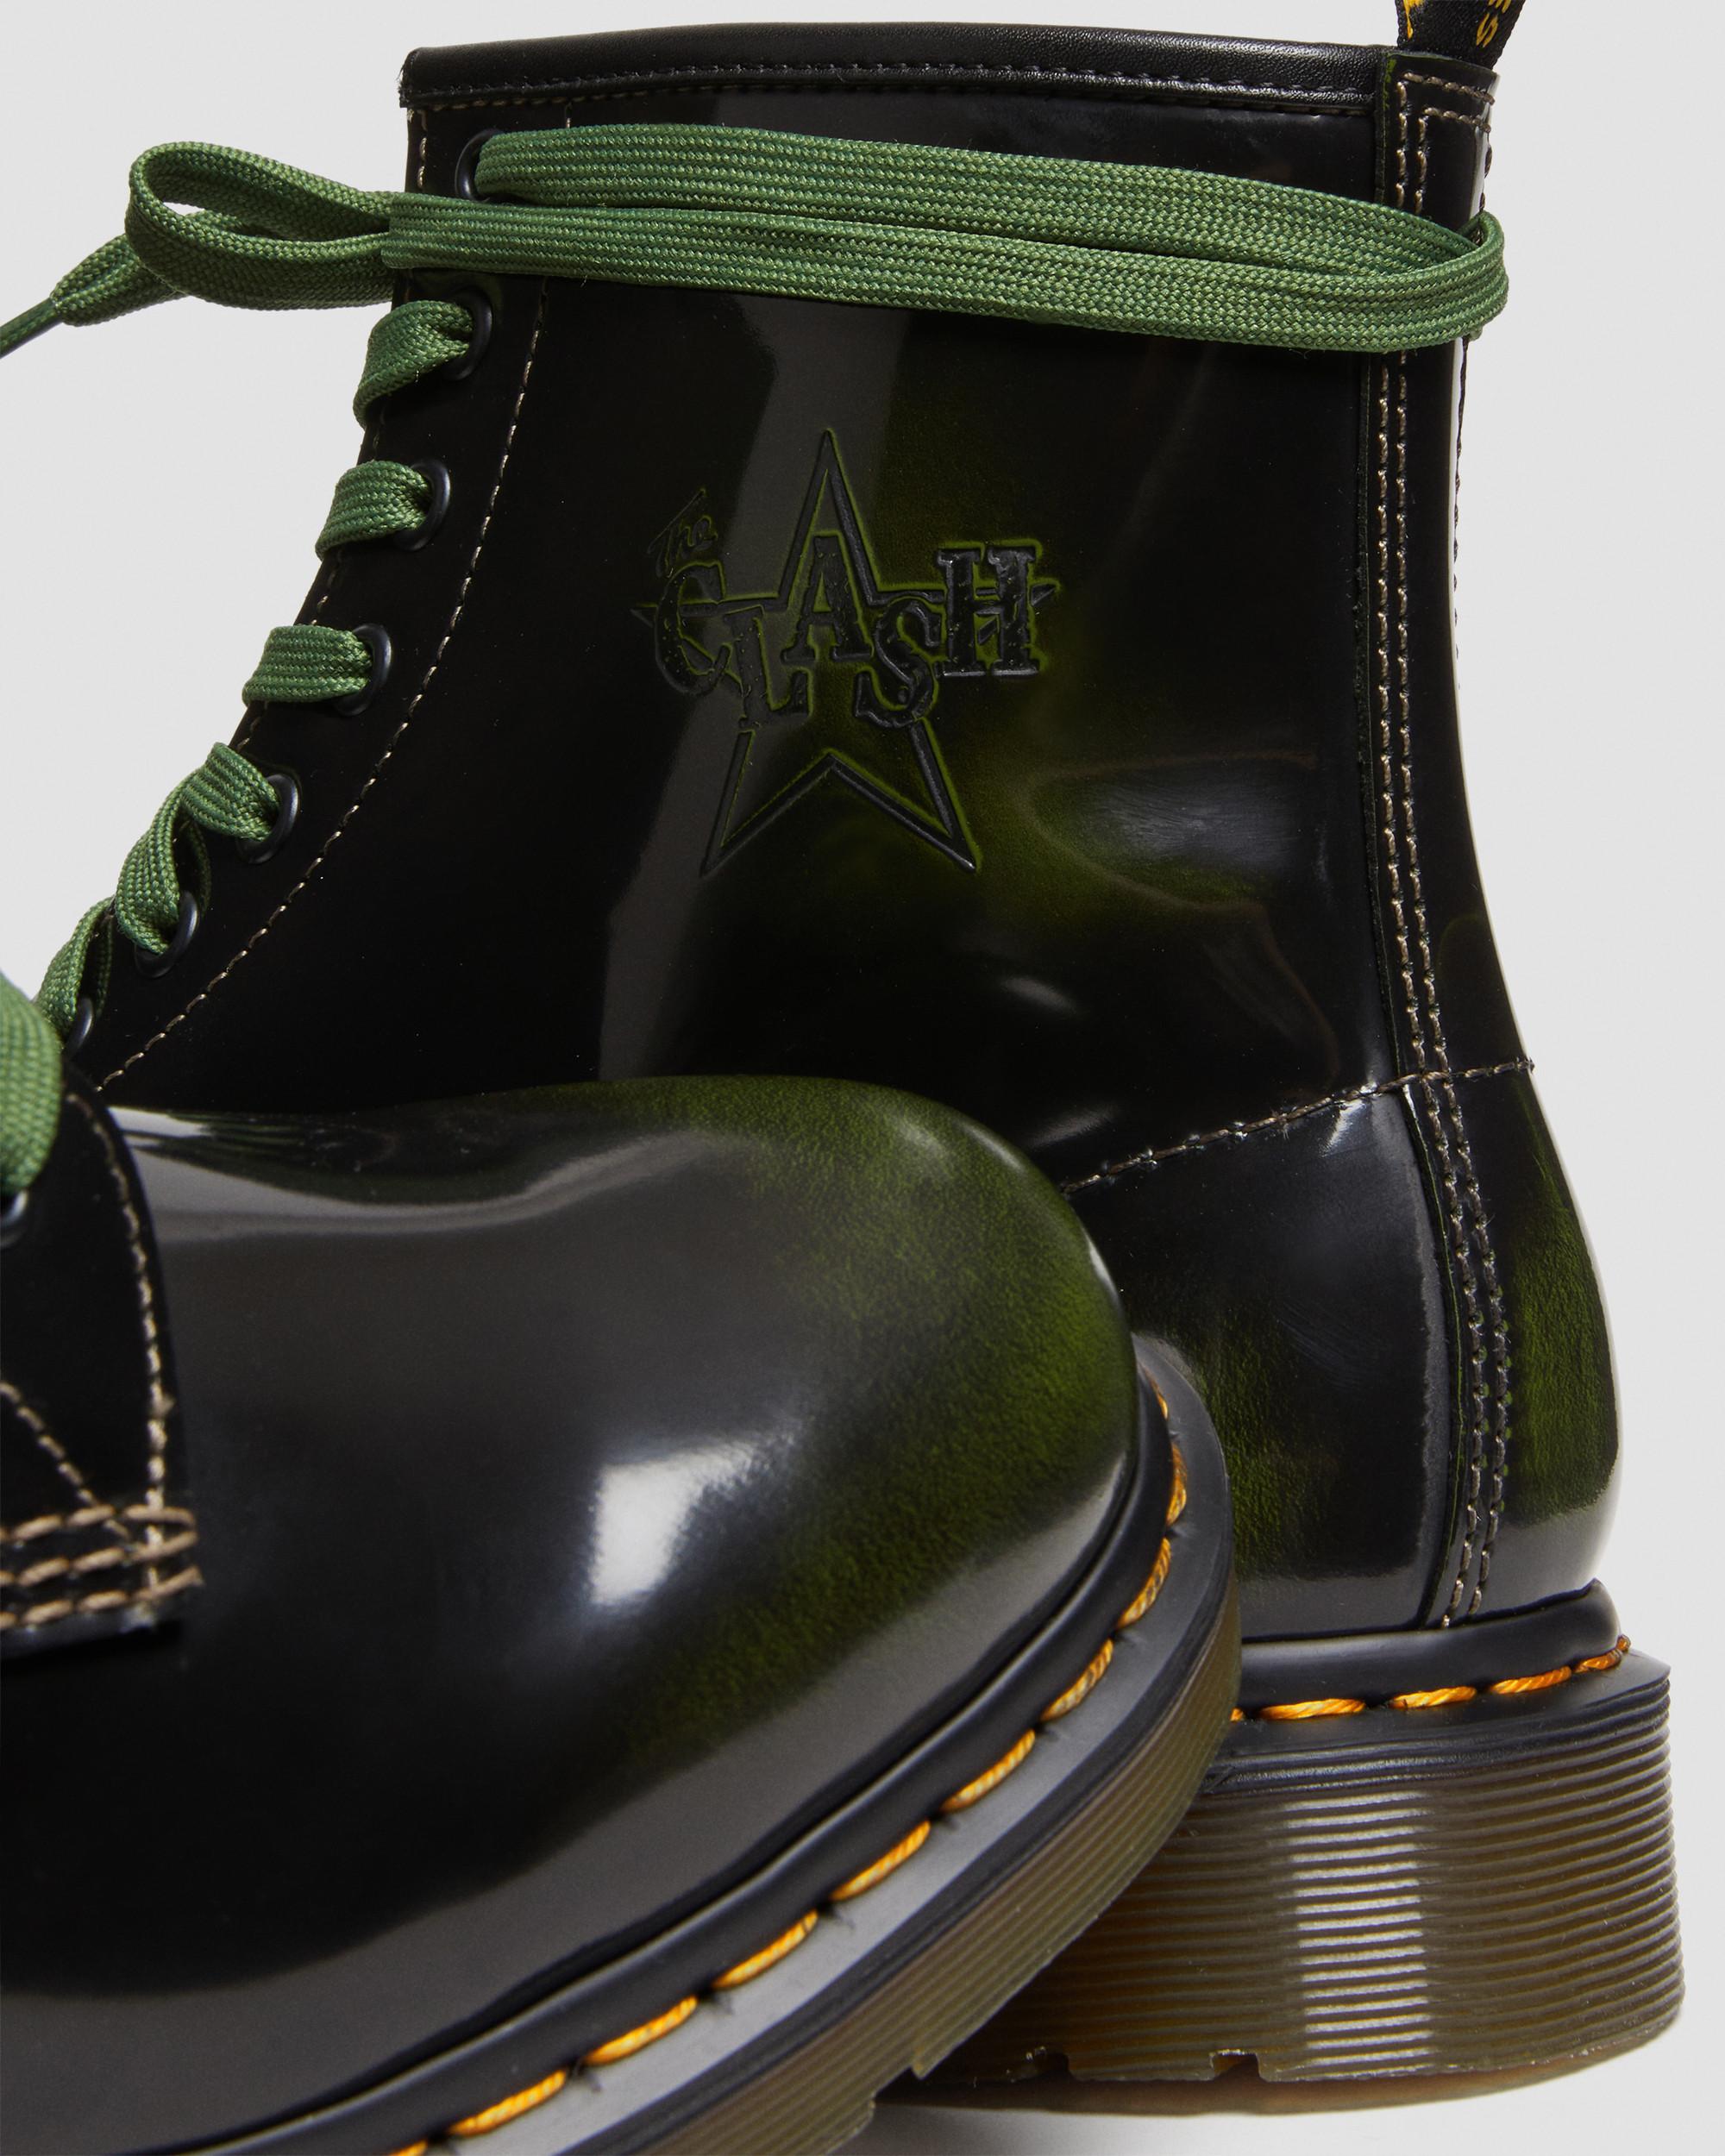 1460 THE CLASH Arcadia Leather Boots1460 THE CLASH Arcadia Leather Boots Dr. Martens